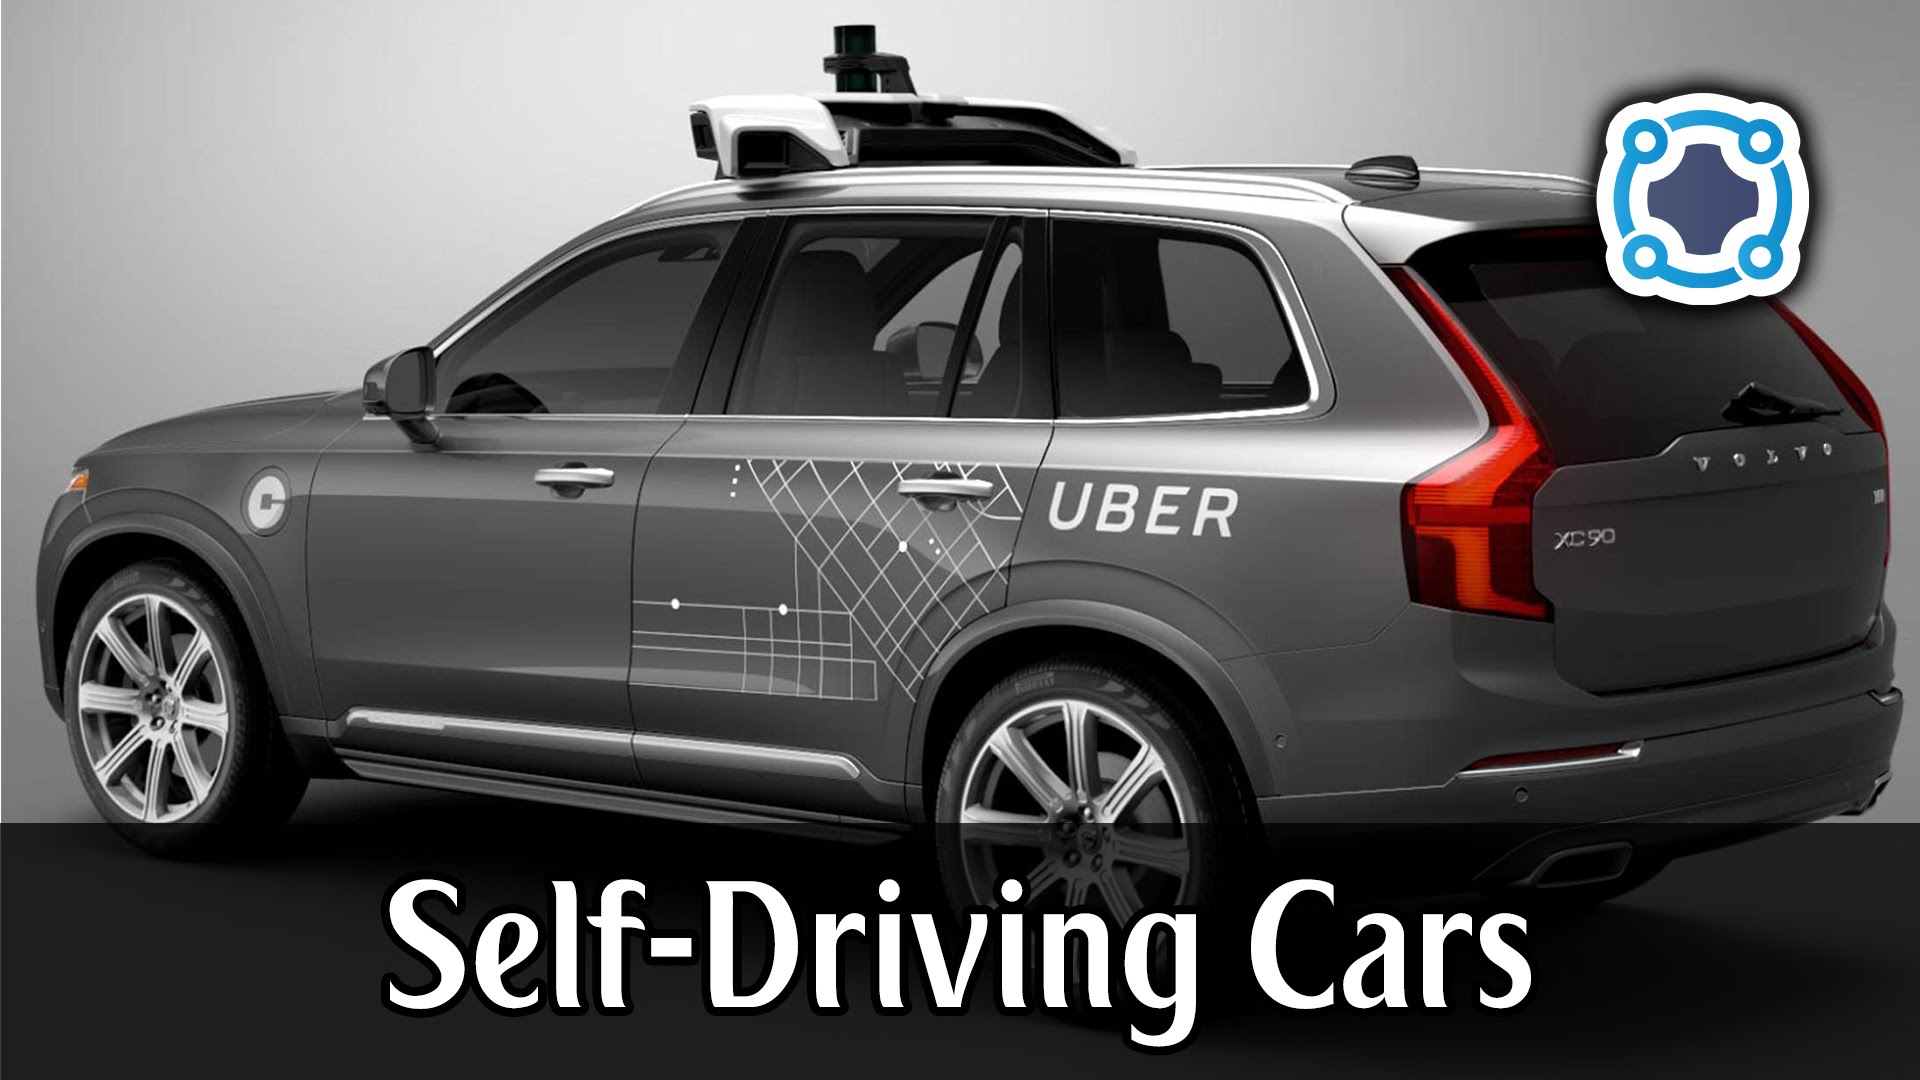 WILL SELF-DRIVING CARS BECOME THE NORM?